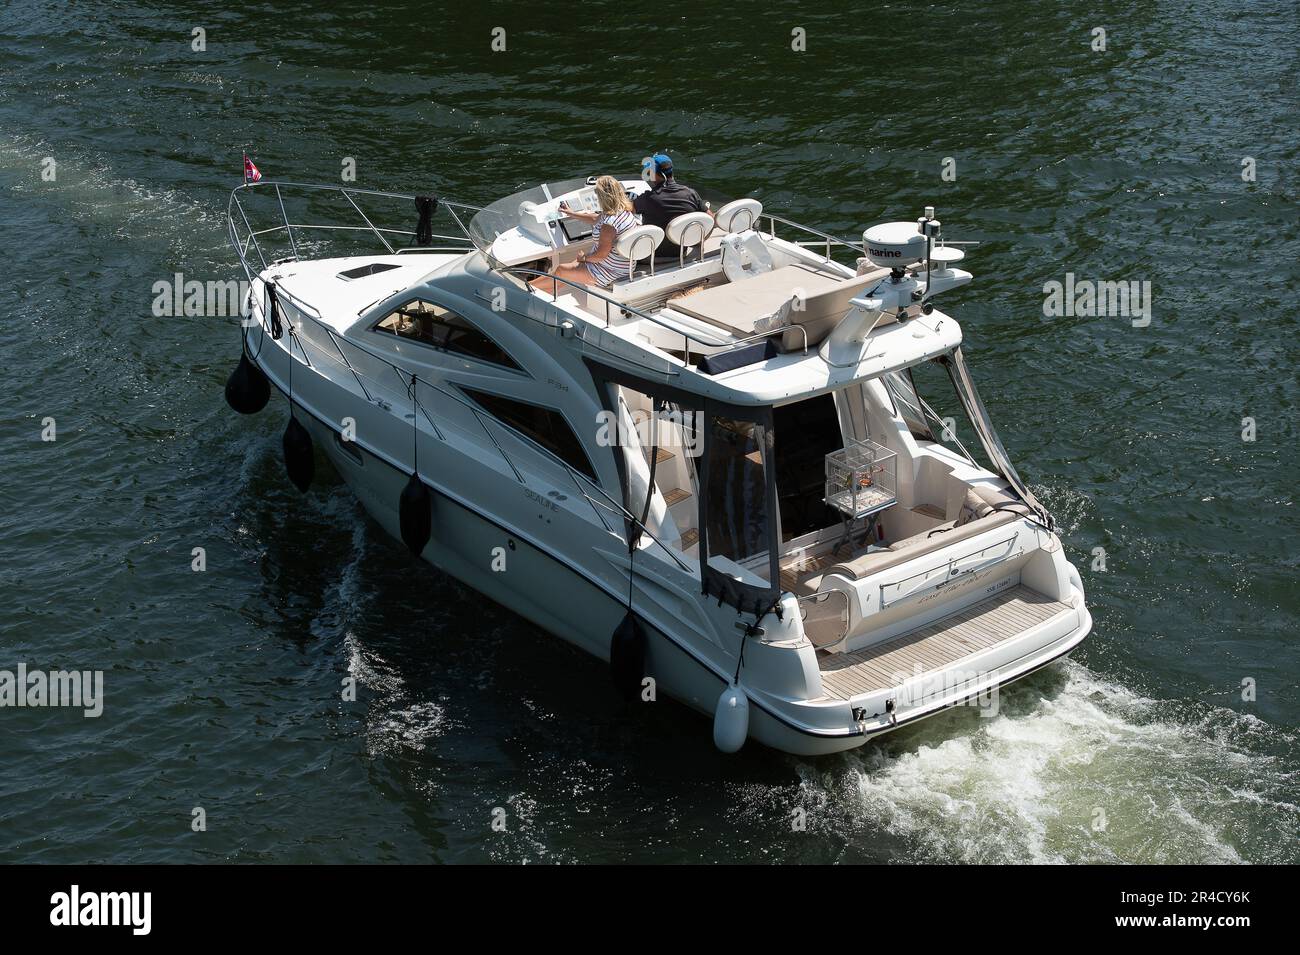 Windsor, Berkshire, UK. 27th May, 23. It was a beautiful warm and sunny day in Windsor, Berkshire today. A lot of people bring their cruising boats down to Windsor for the bank holiday weekends. Credit: Maureen McLean/Alamy Live News Stock Photo